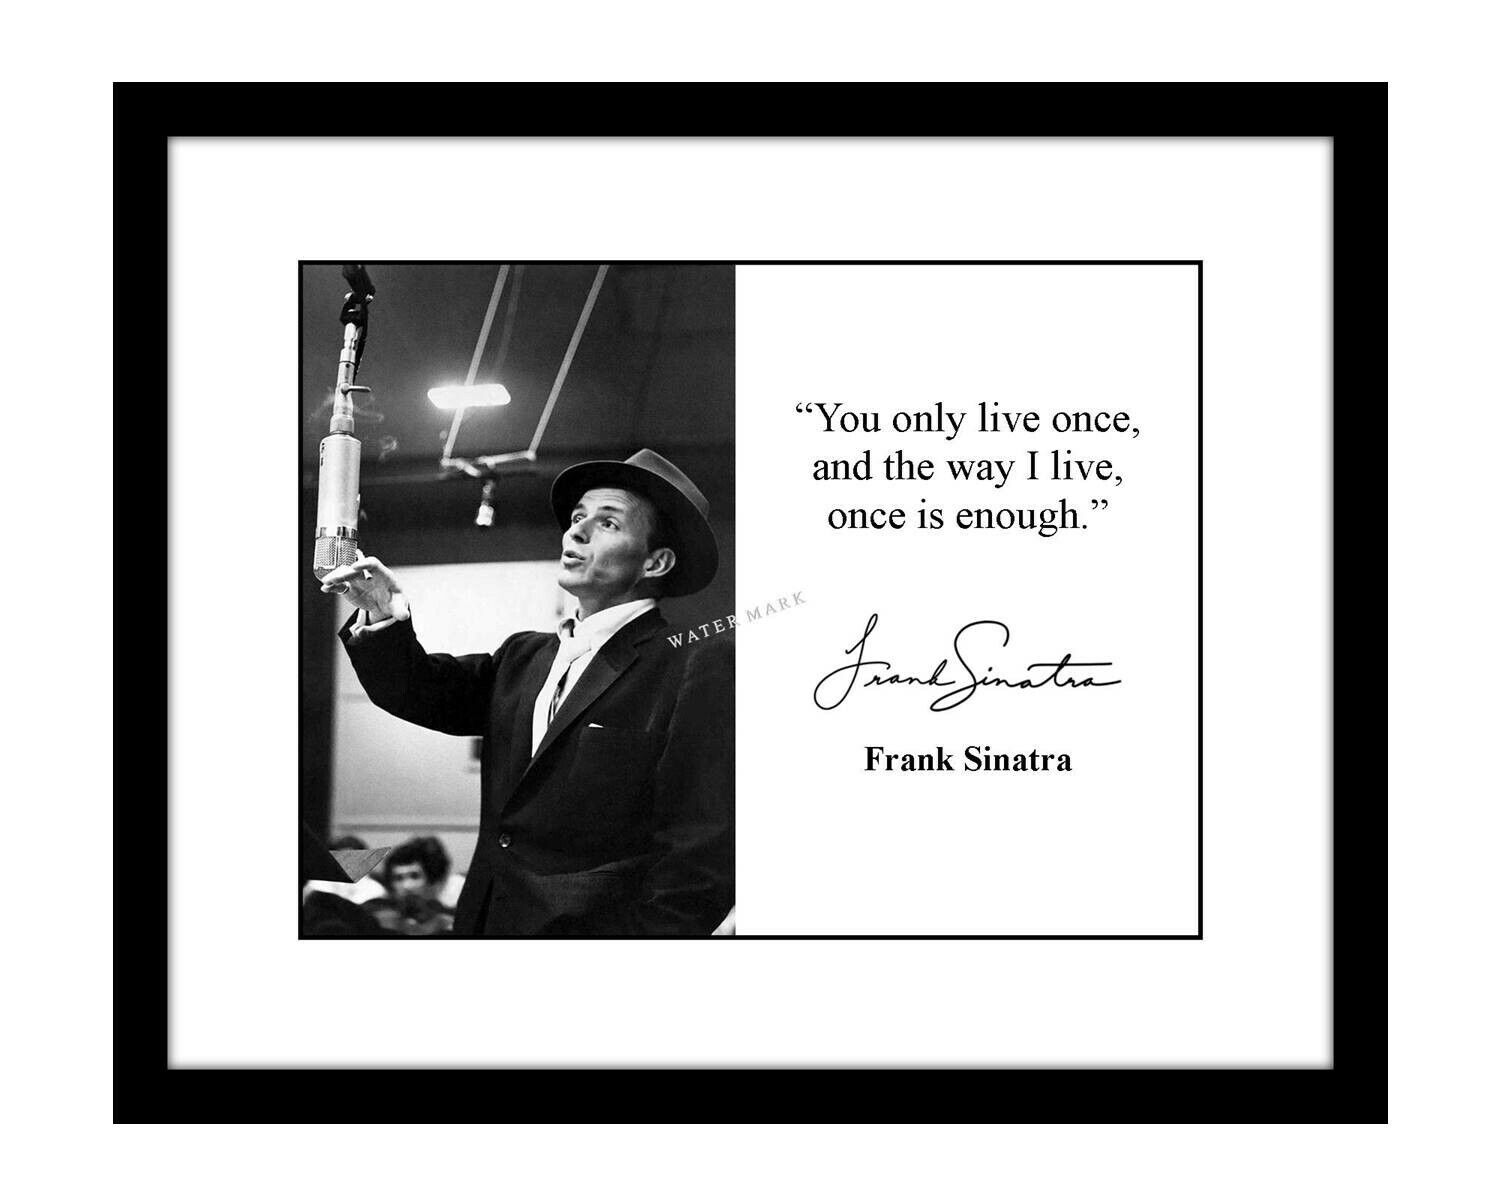 Frank Sinatra 8x10 Signed Photo Print you only live once quote rat pack